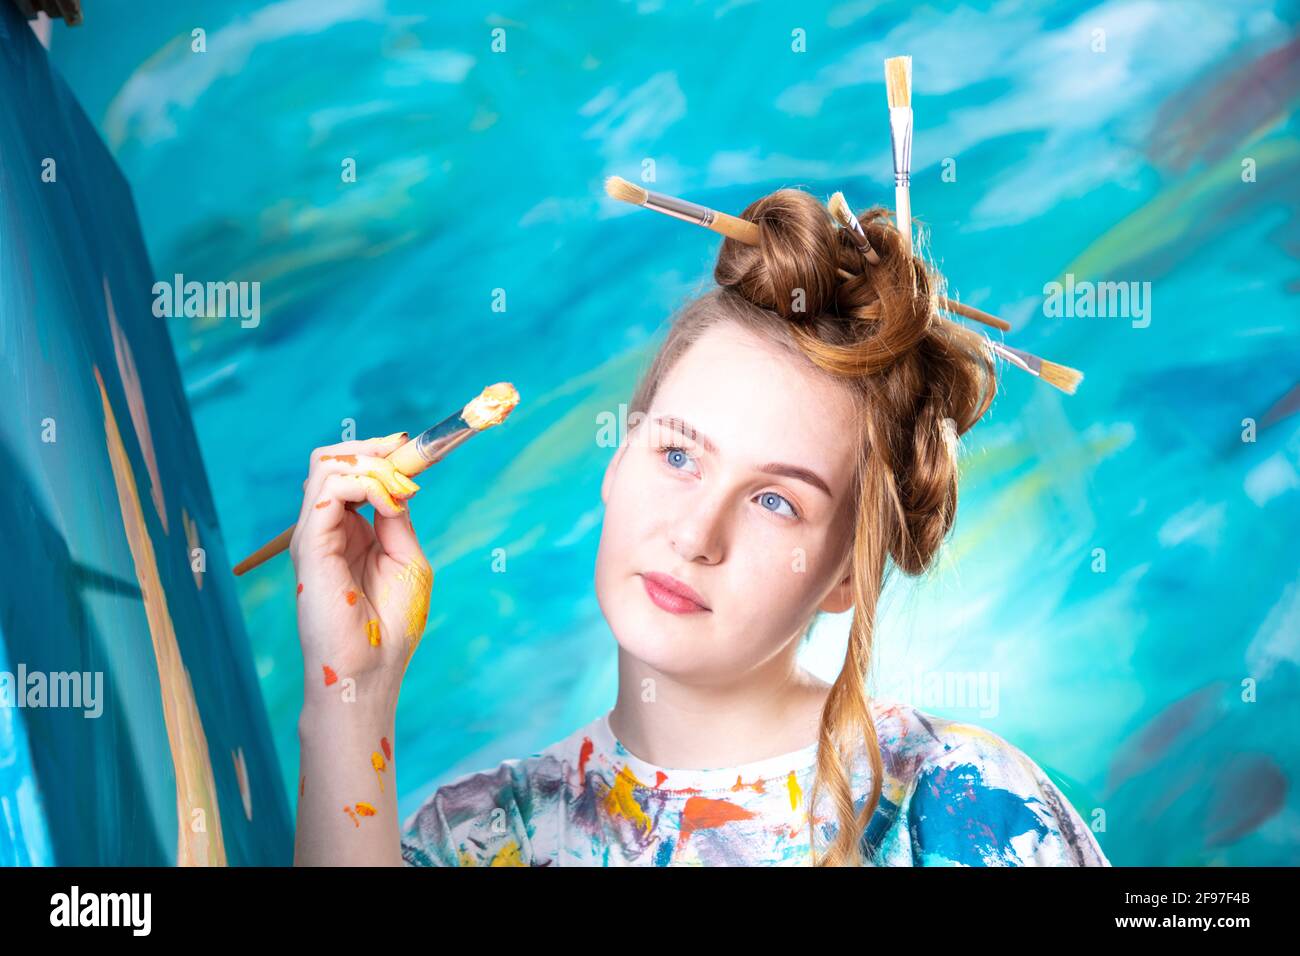 Young woman with updo and brush in her hair while painting. Stock Photo